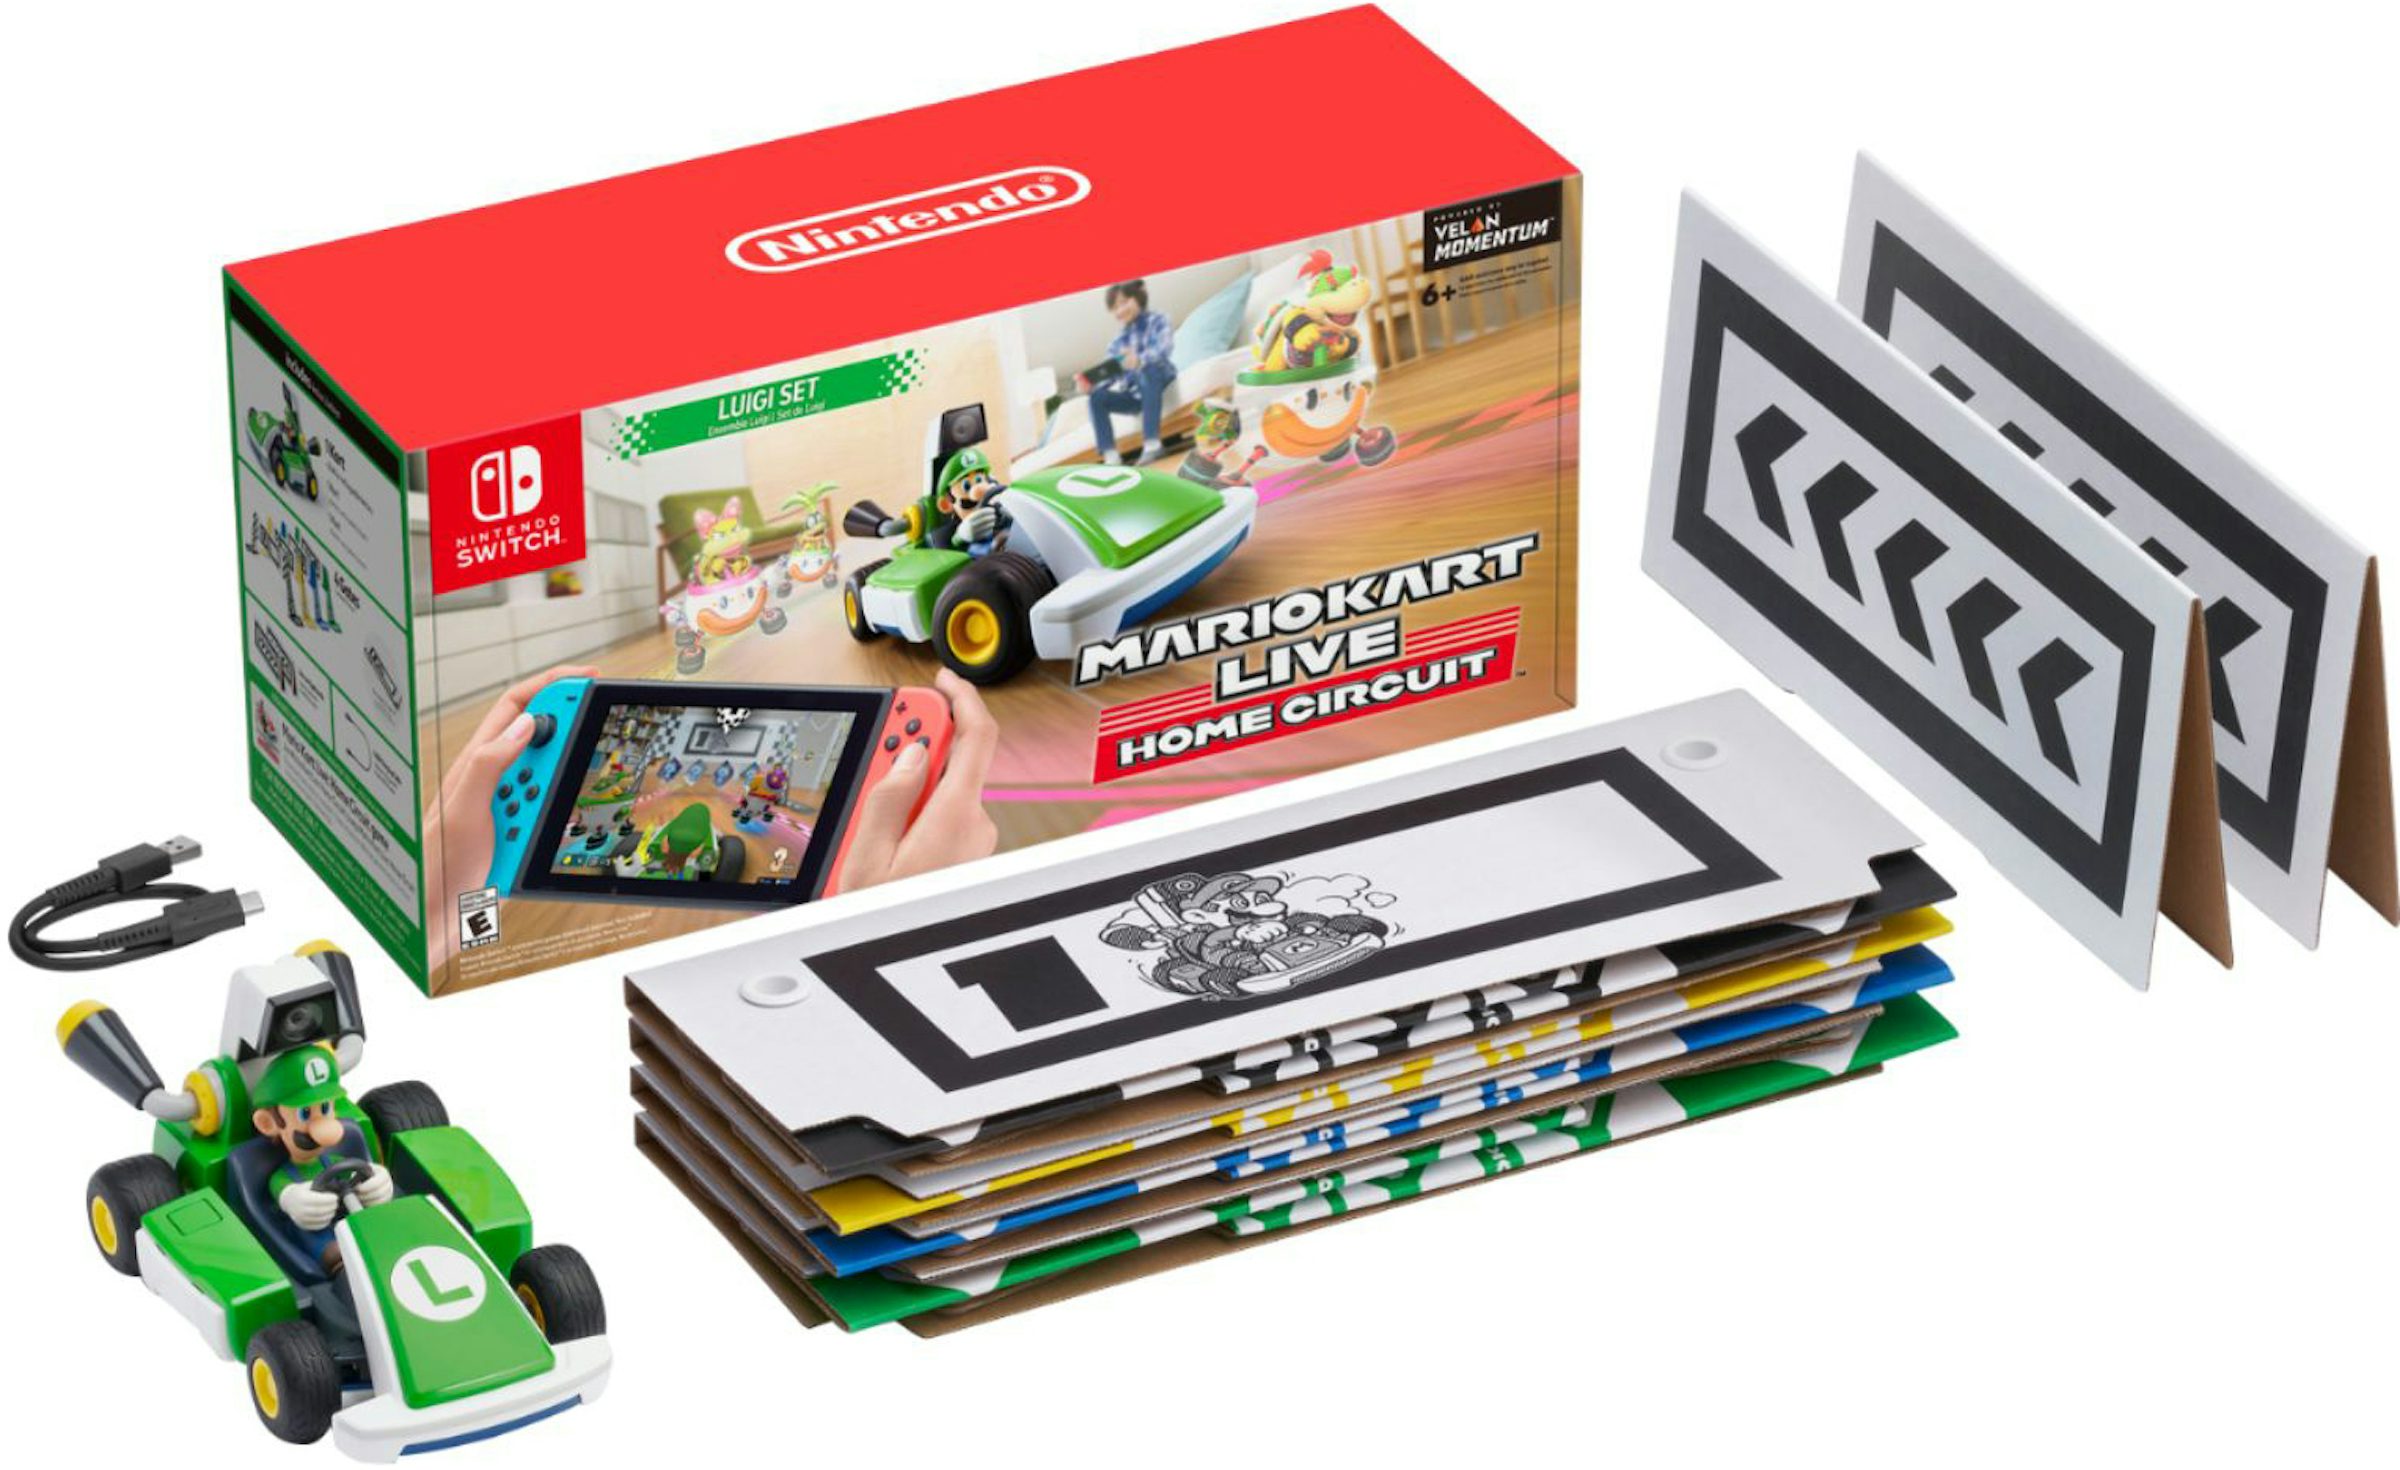 Nintendo's 'Mario Kart Live: Home Circuit' is $10 off at